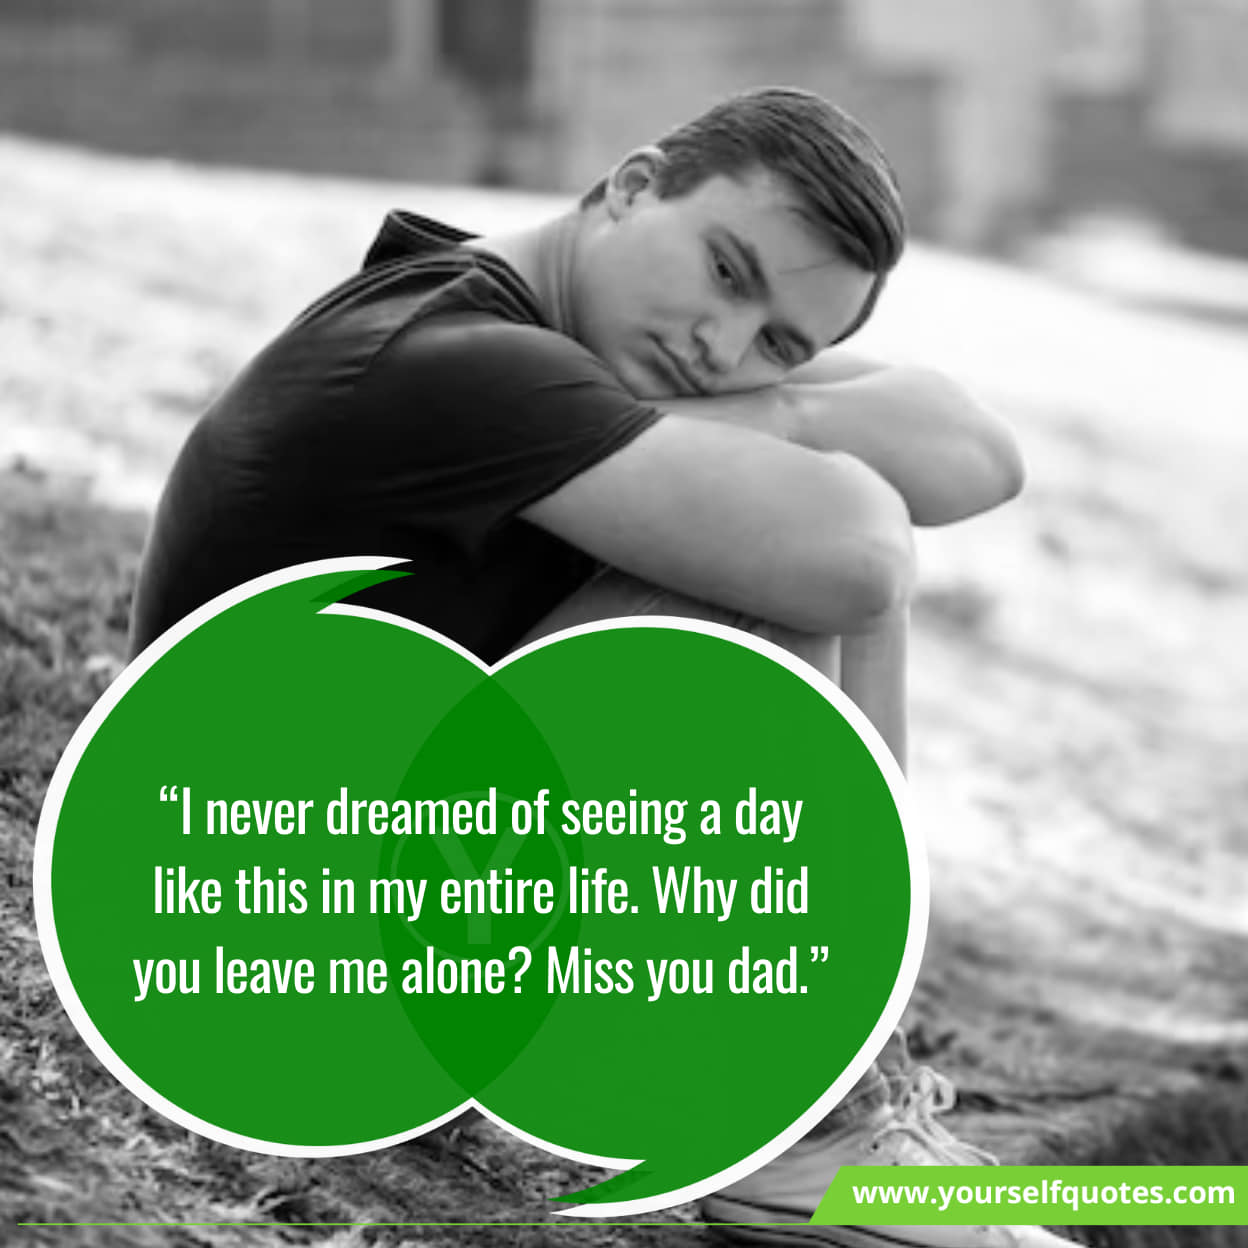 Miss You Messages For Dad After Death To Remember Him